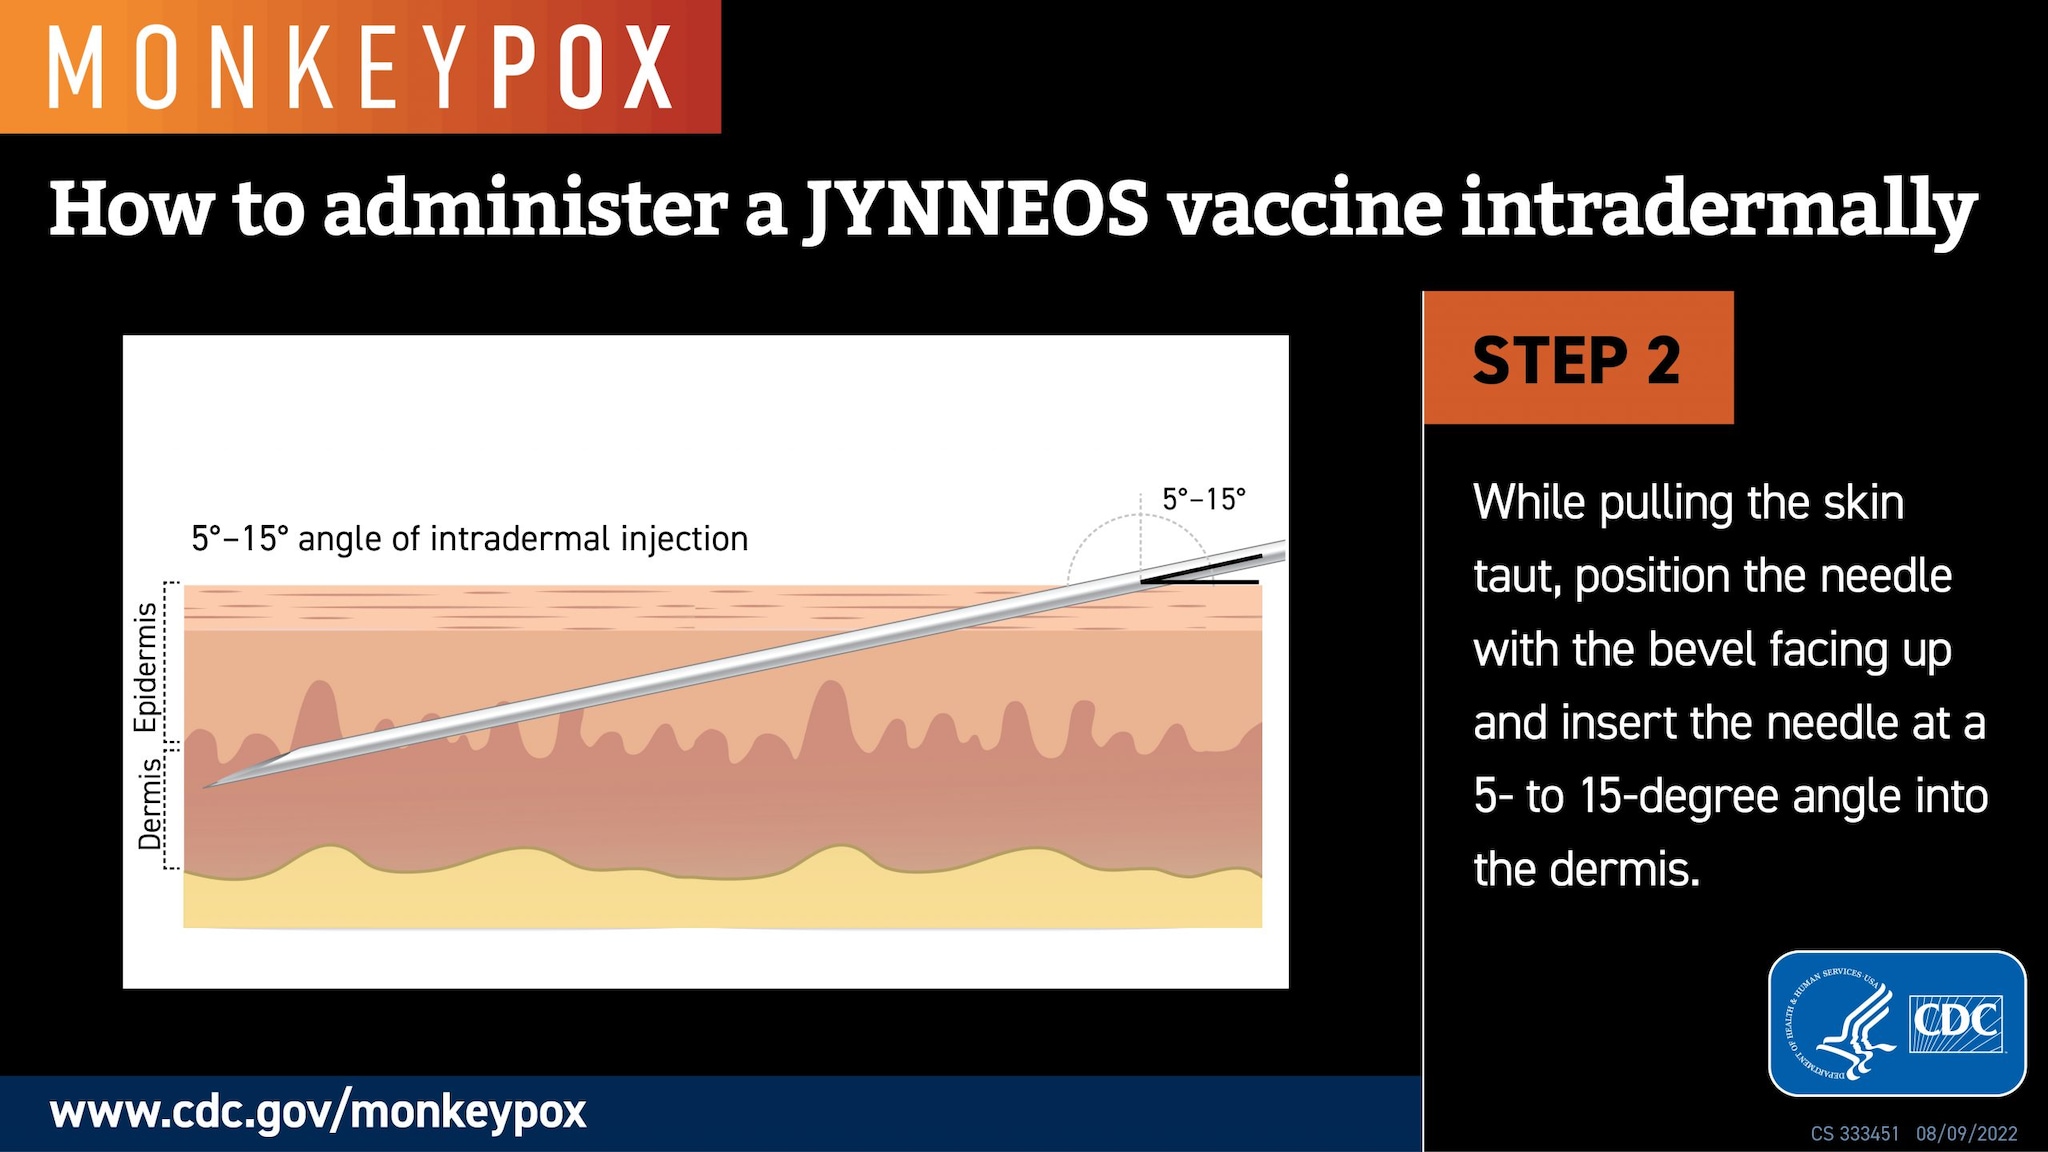 How to administer a Jynneos vaccine intradermally